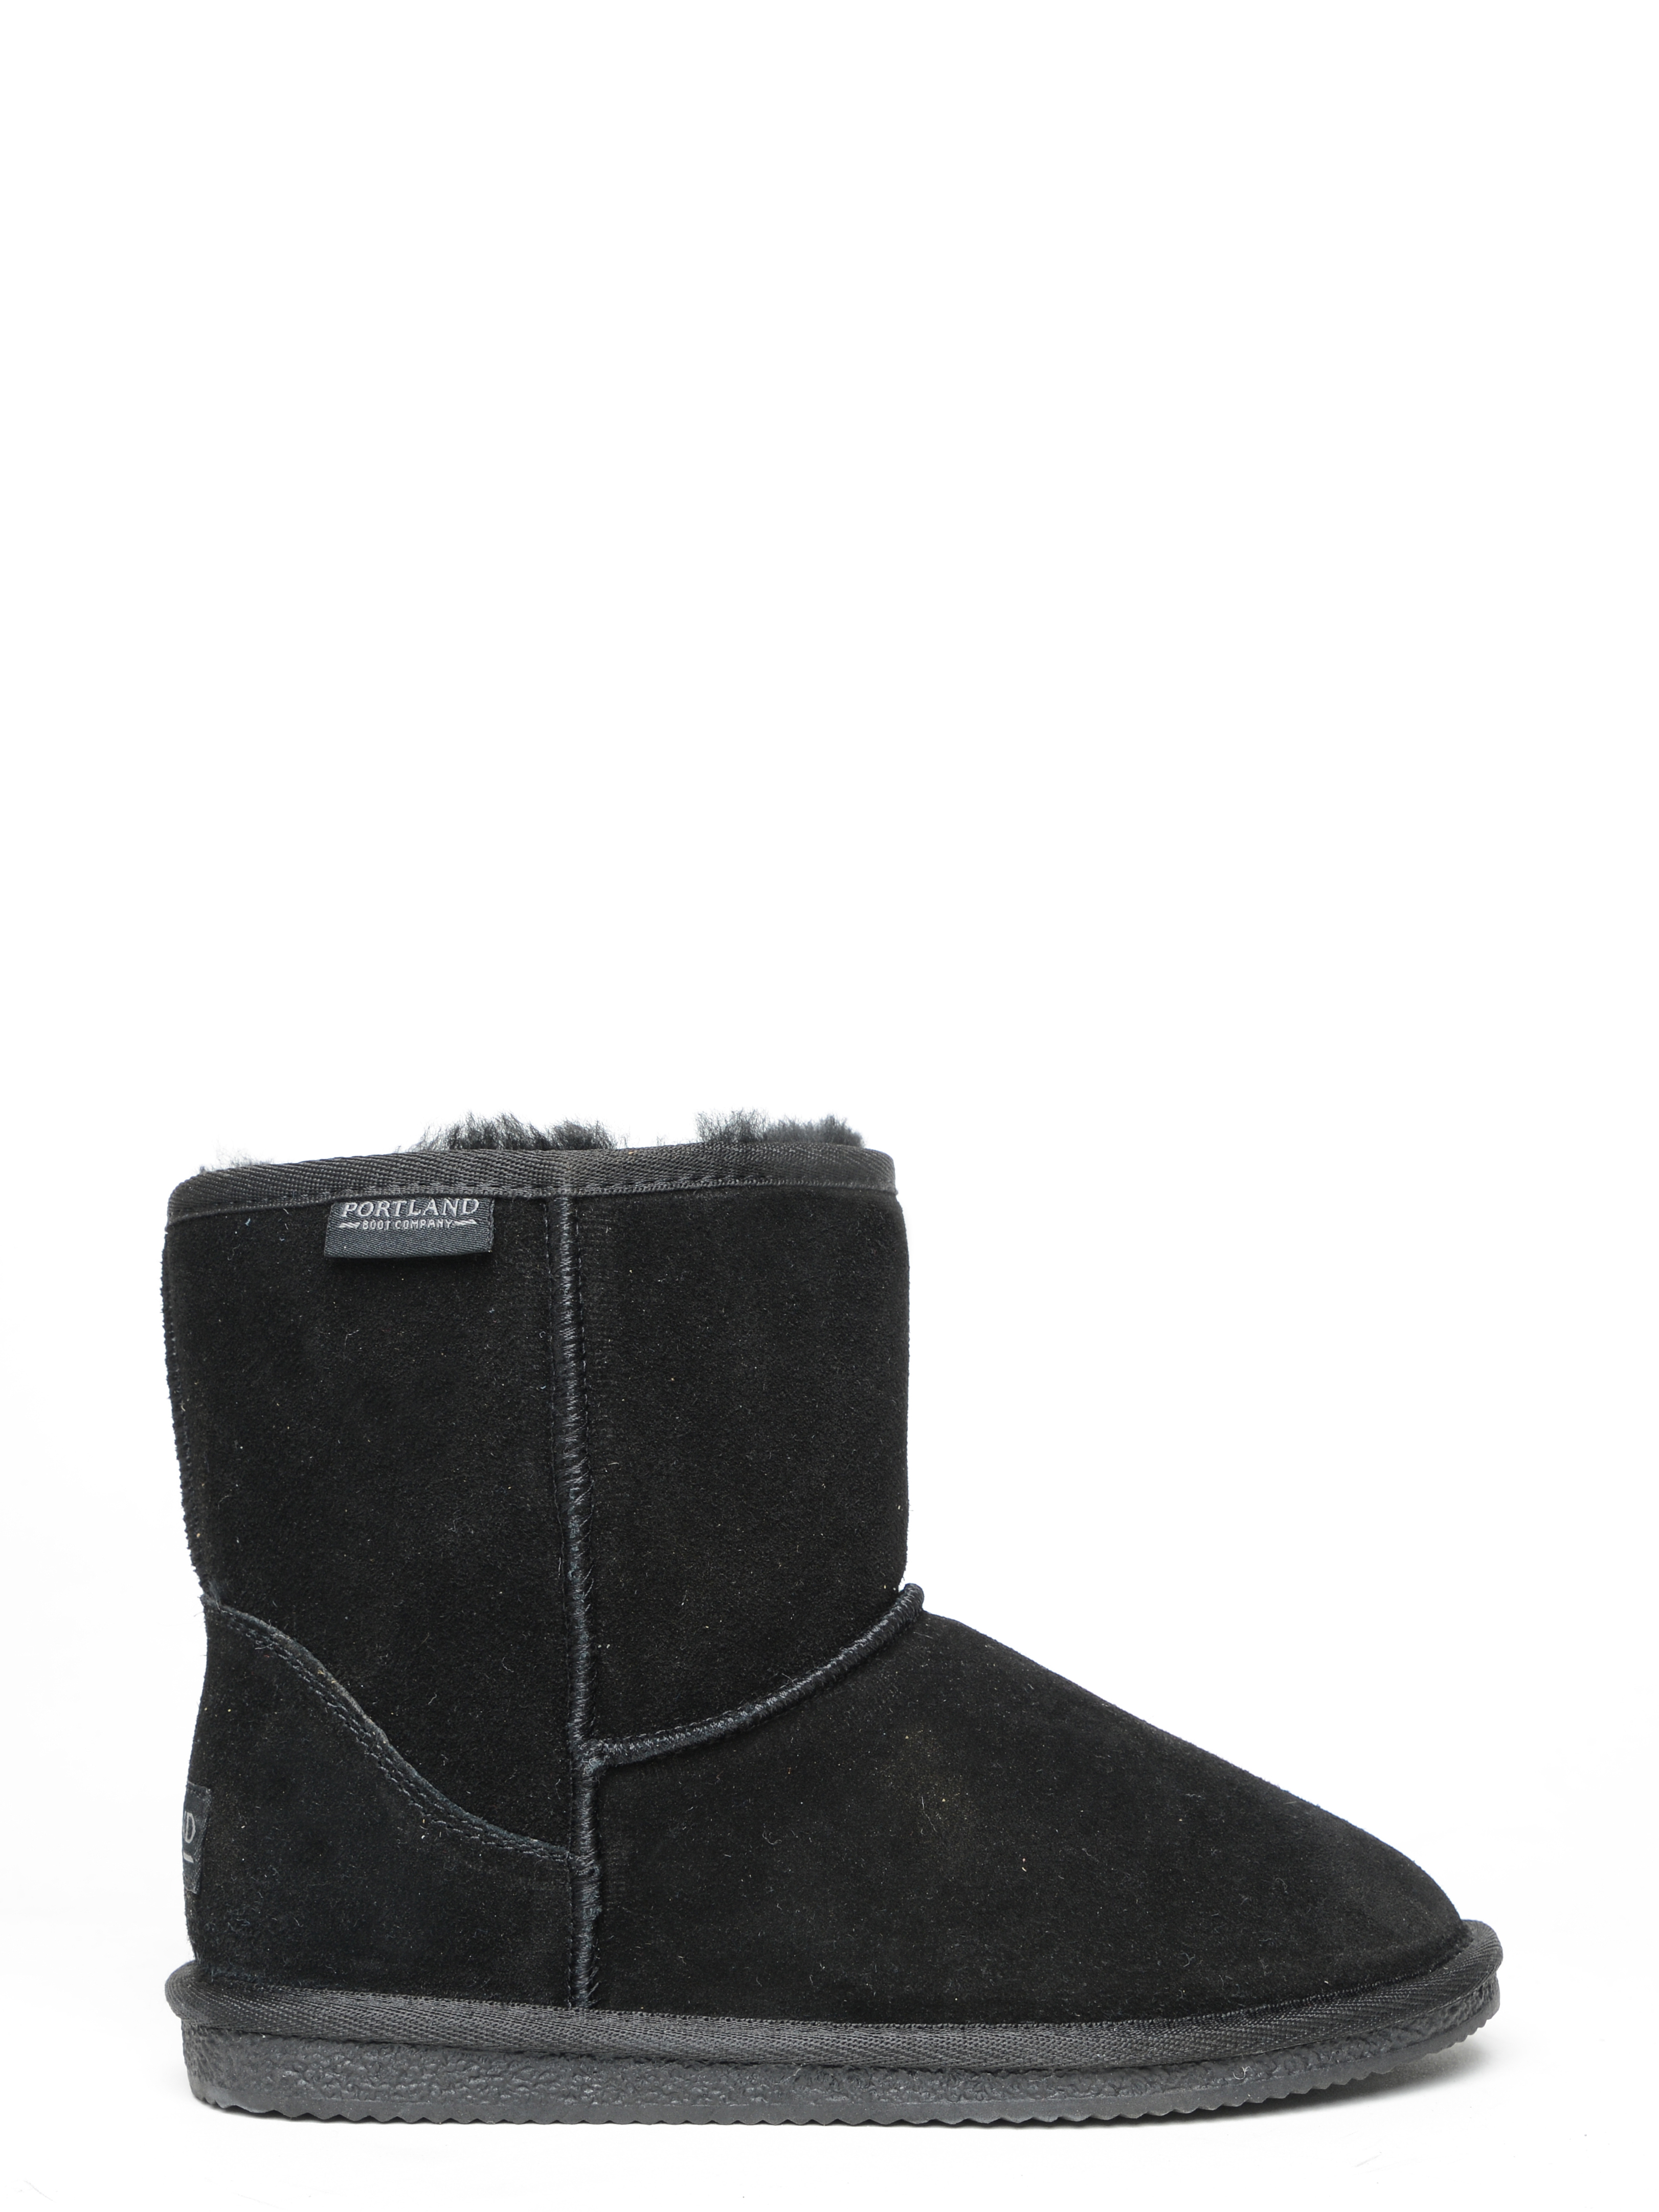 Portland Boot Company Women's Short Cozy Suede Boot - image 3 of 5